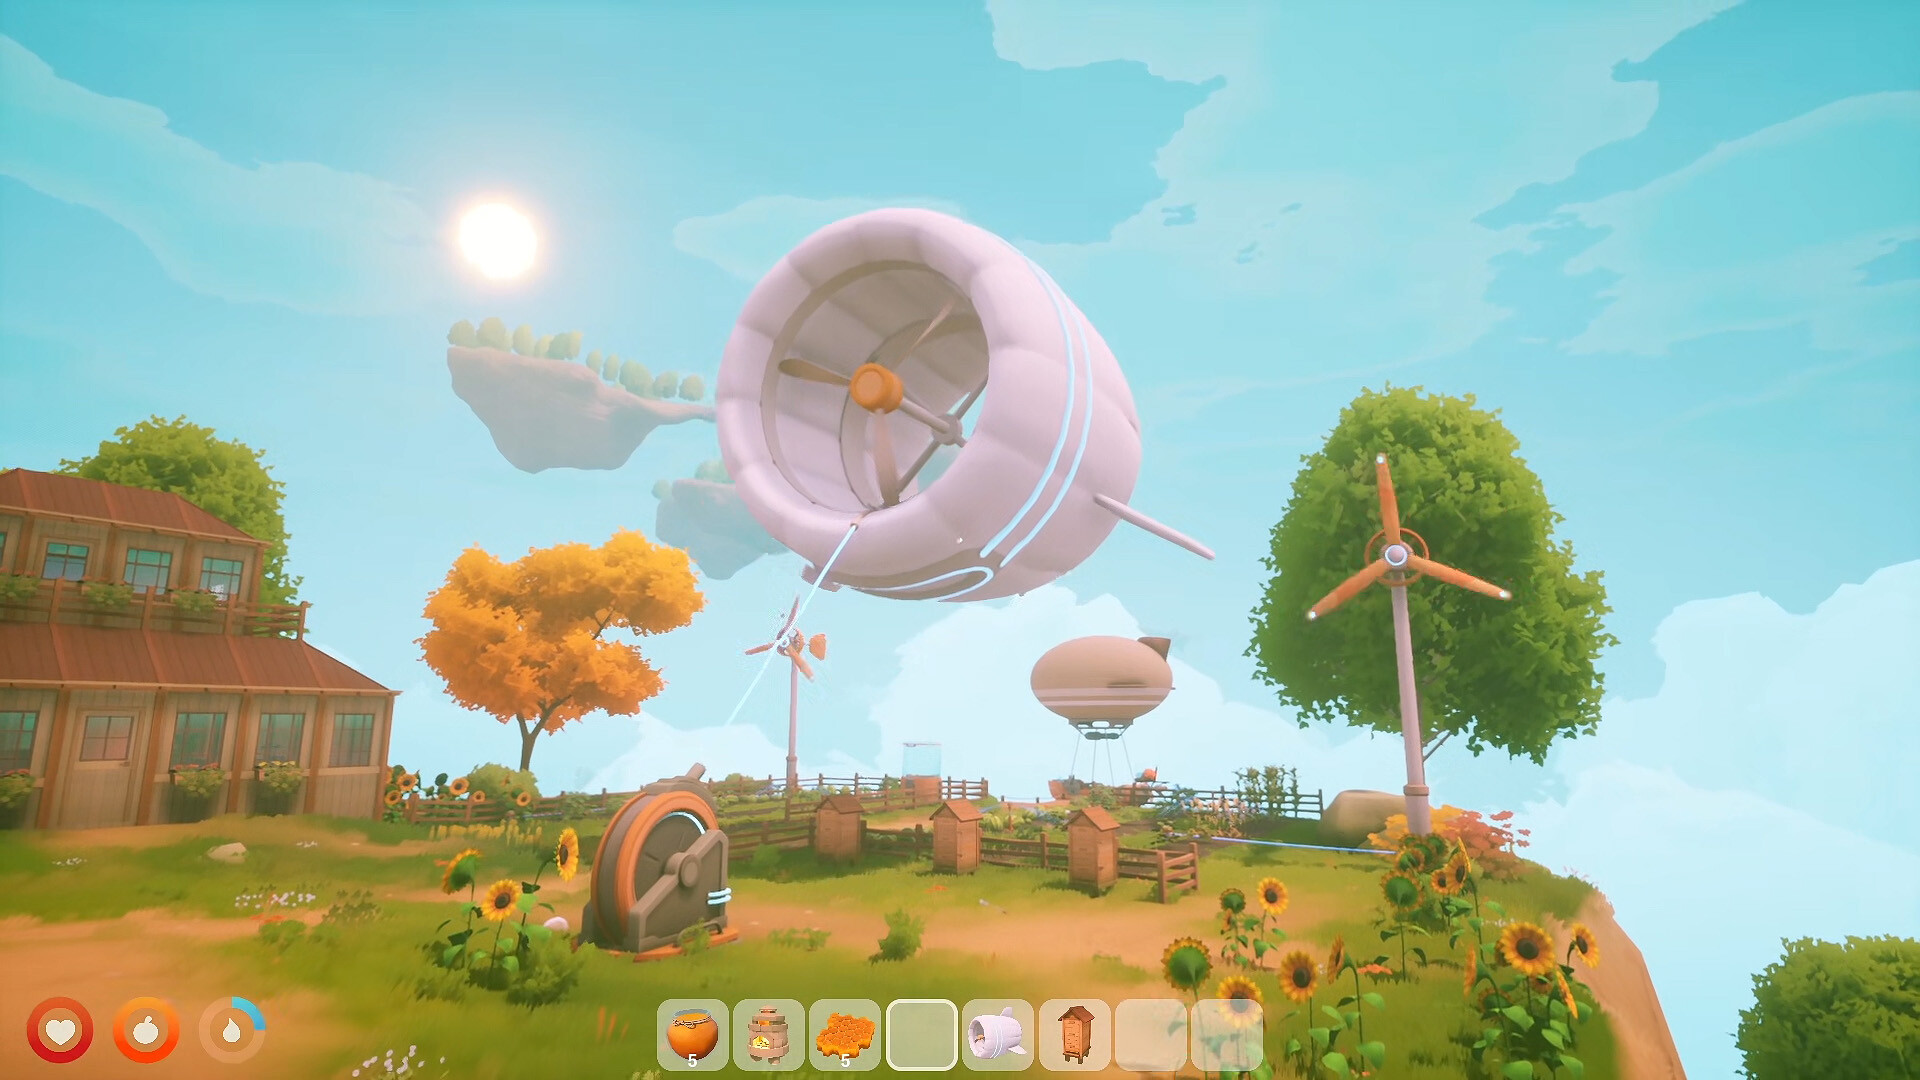 Solarpunk cozy survival craft game (PC) Key cheap - Price of $ for Steam